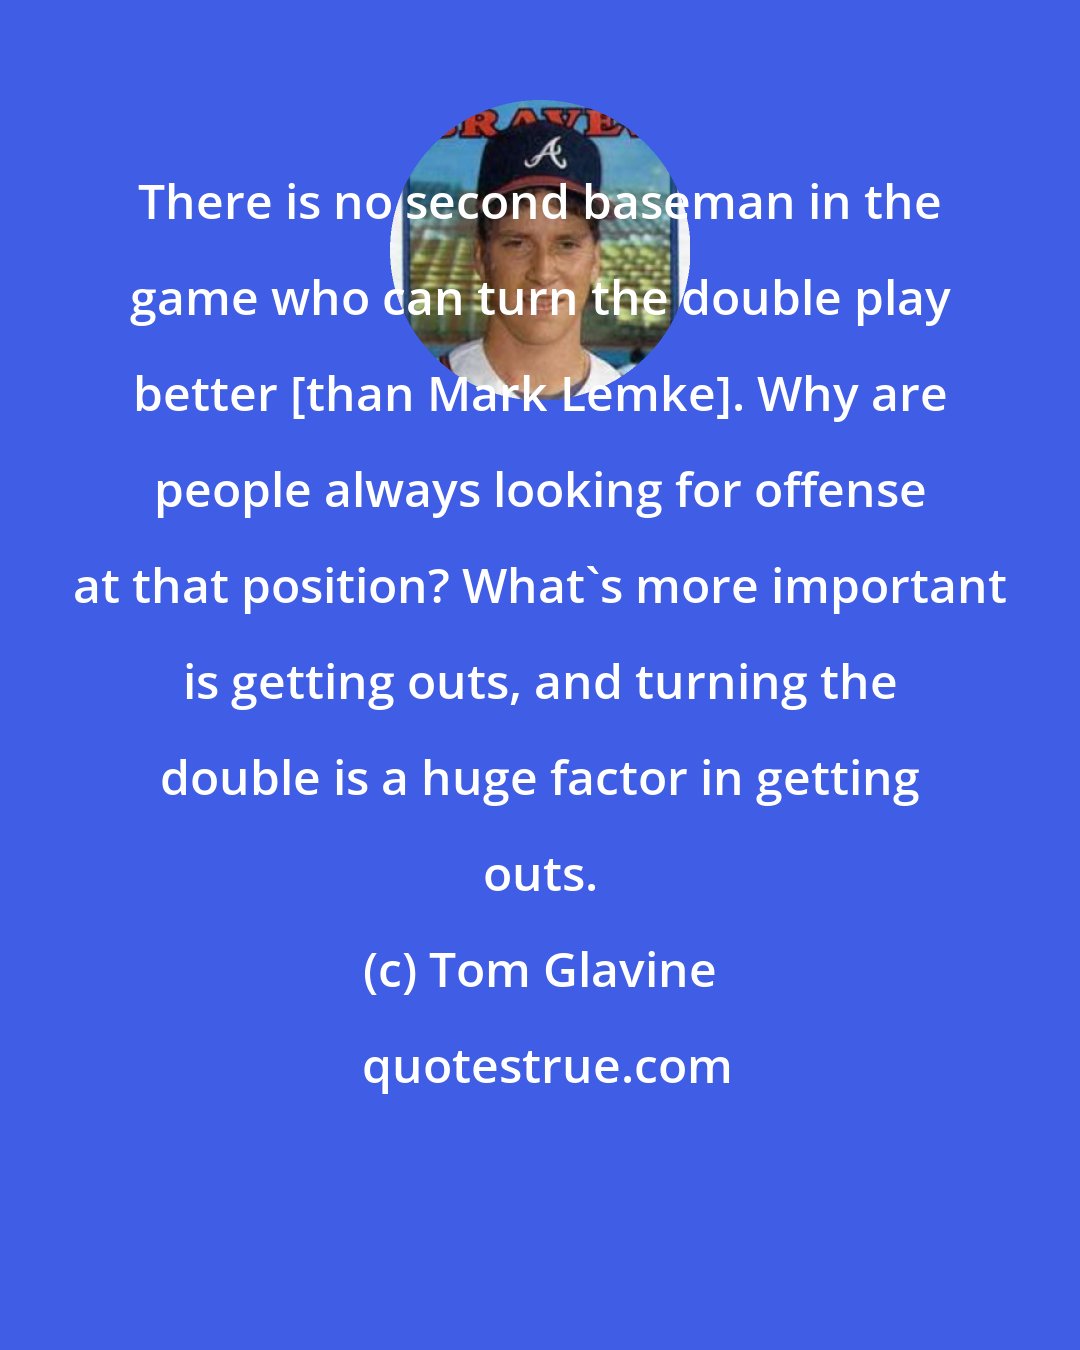 Tom Glavine: There is no second baseman in the game who can turn the double play better [than Mark Lemke]. Why are people always looking for offense at that position? What's more important is getting outs, and turning the double is a huge factor in getting outs.